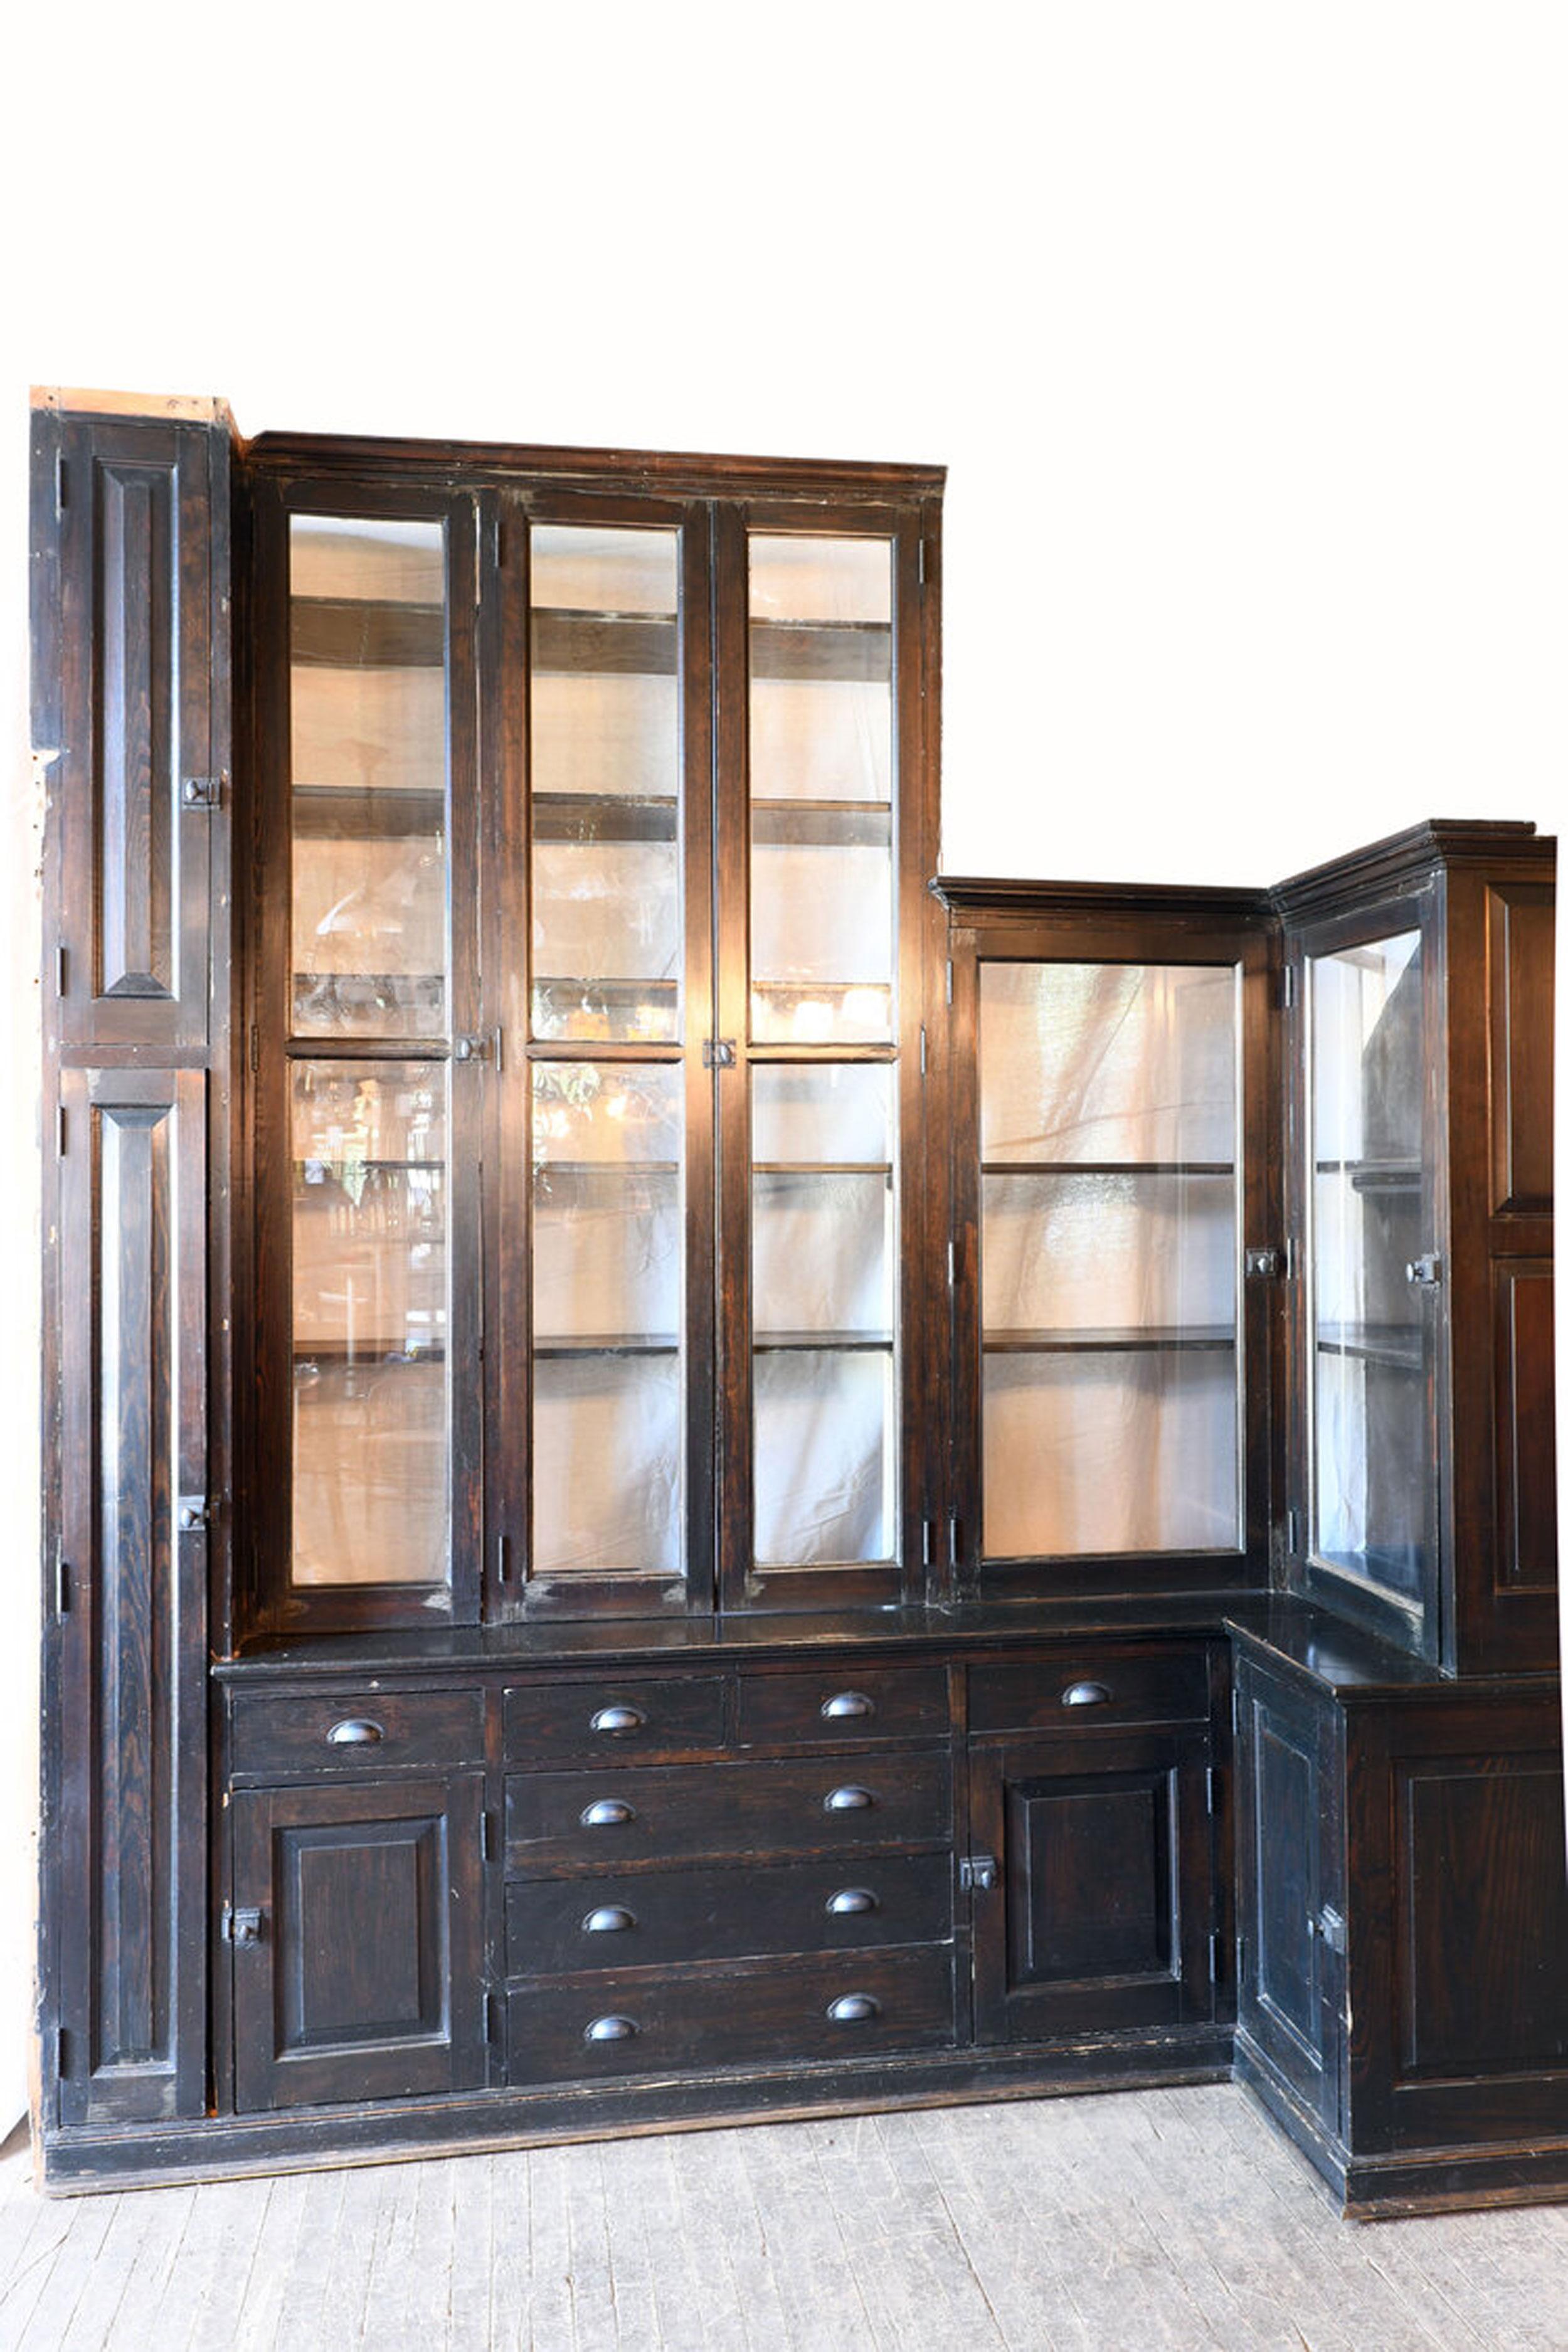 Early 20th Century Dark Stained Butlers Pantry